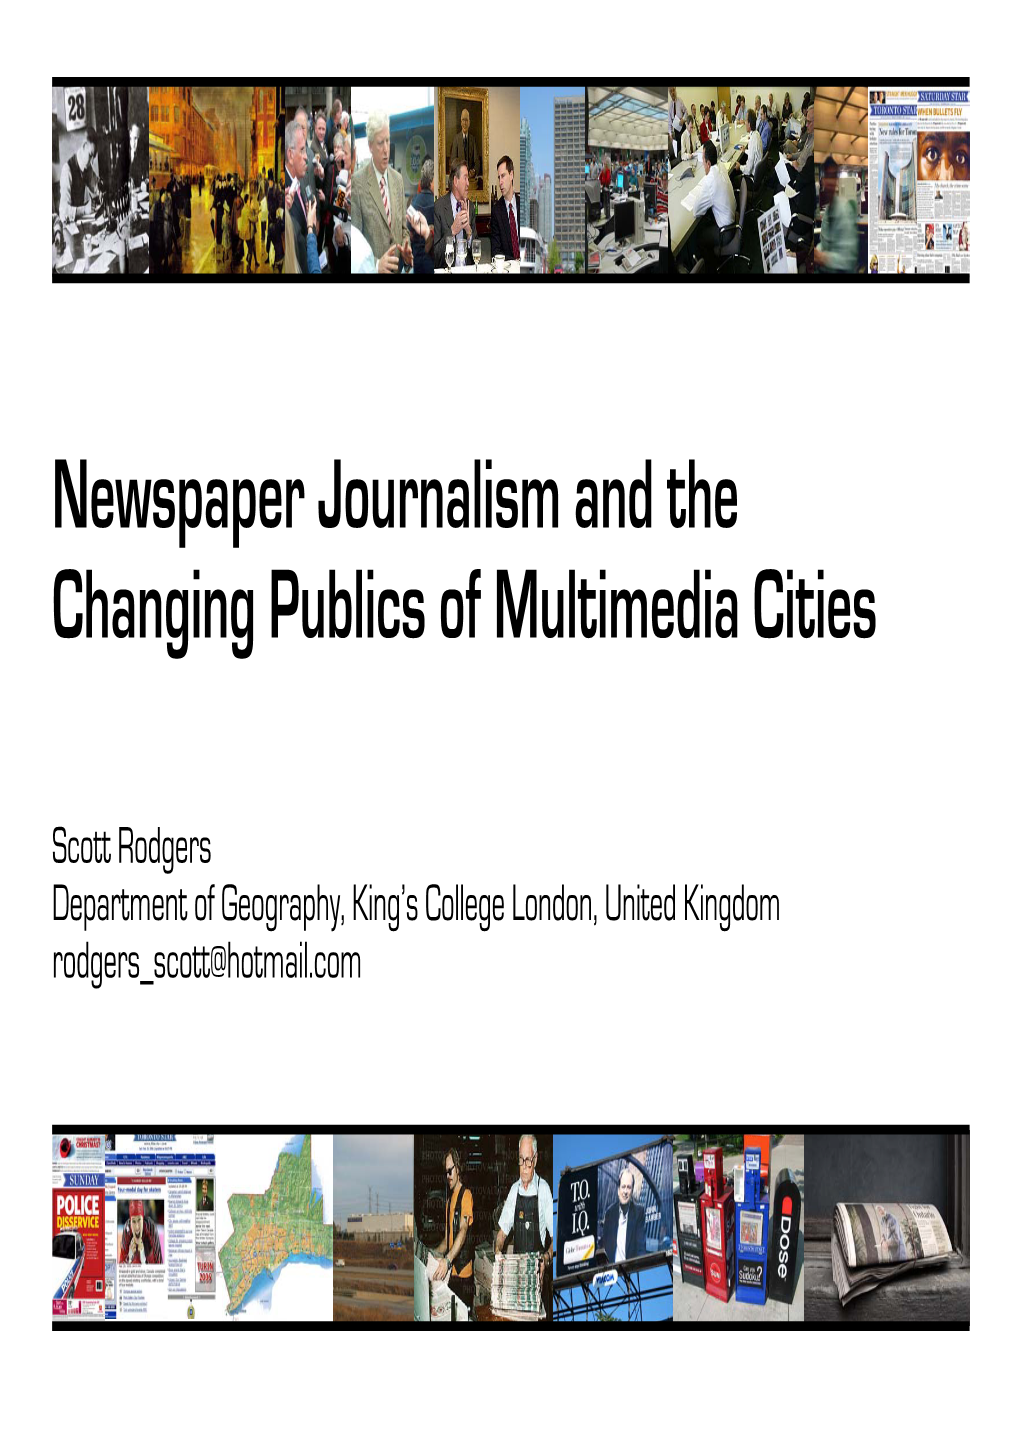 Newspaper Journalism and the Changing Publics of Multimedia Cities